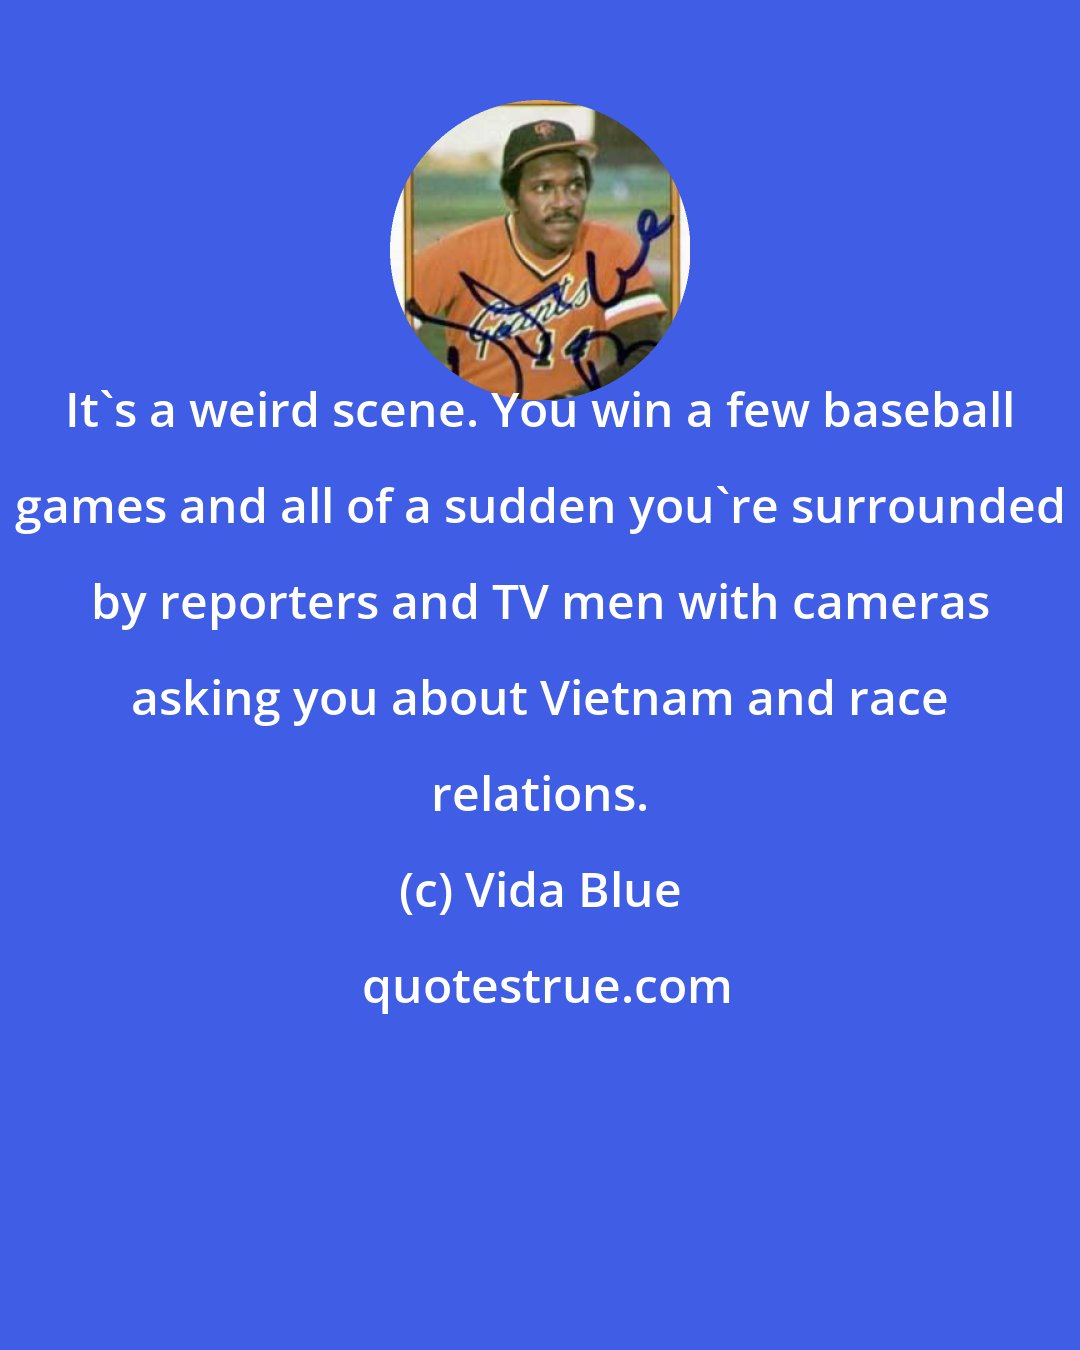 Vida Blue: It's a weird scene. You win a few baseball games and all of a sudden you're surrounded by reporters and TV men with cameras asking you about Vietnam and race relations.